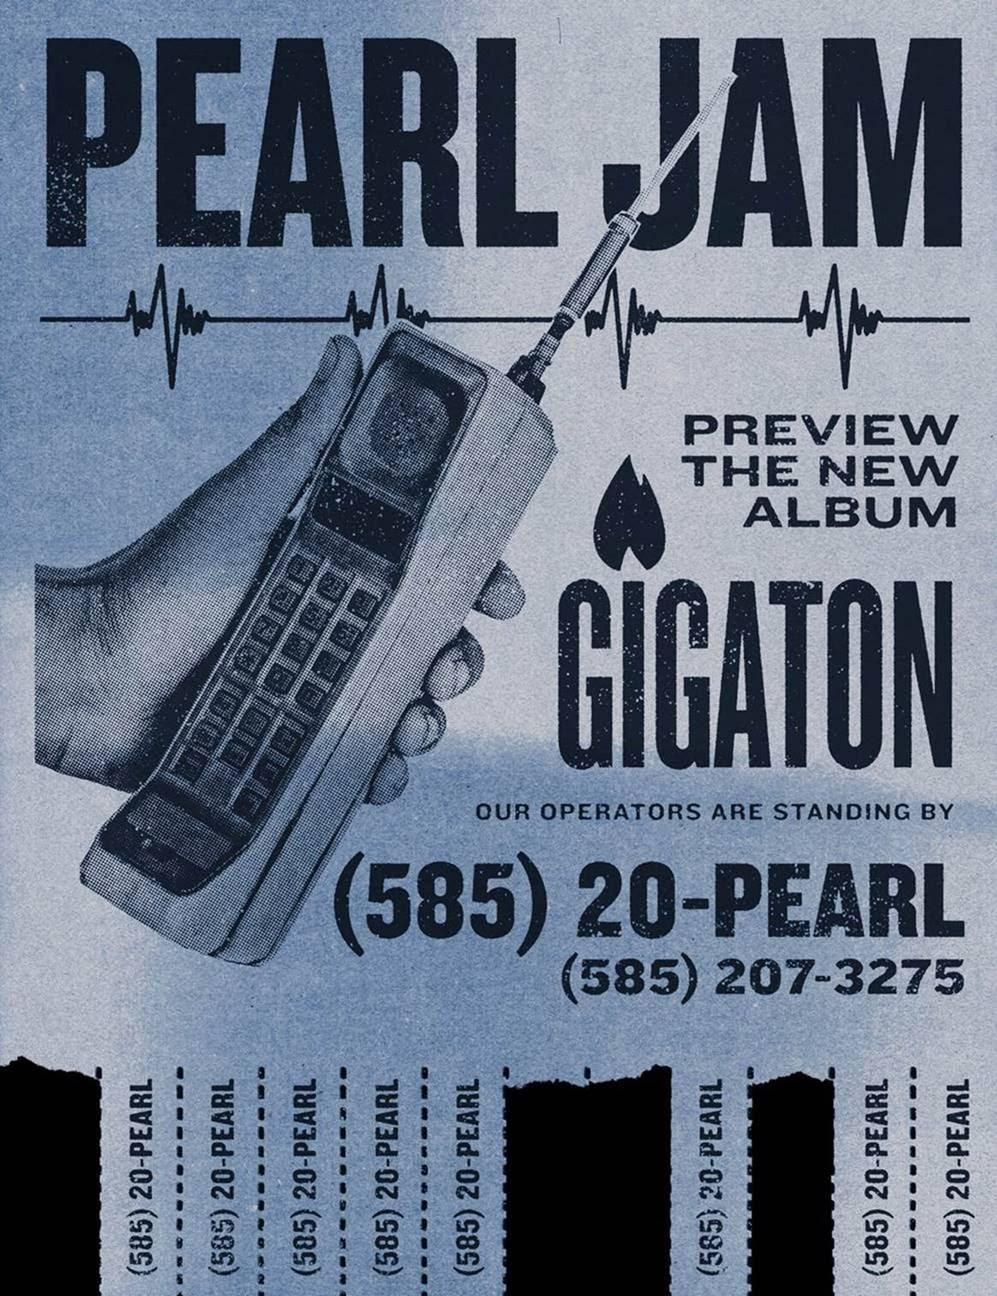 Pearl Jam Shares Hotline to Get Early Listen at <i></noscript> Gigaton</i>” title=”unnamed-1584990415″ data-original-id=”352125″ data-adjusted-id=”352125″ class=”sm_size_full_width sm_alignment_center ” data-image-use=”multiple_use” />
<p>In the past week, Pearl Jam has shared snippets of “<a href=